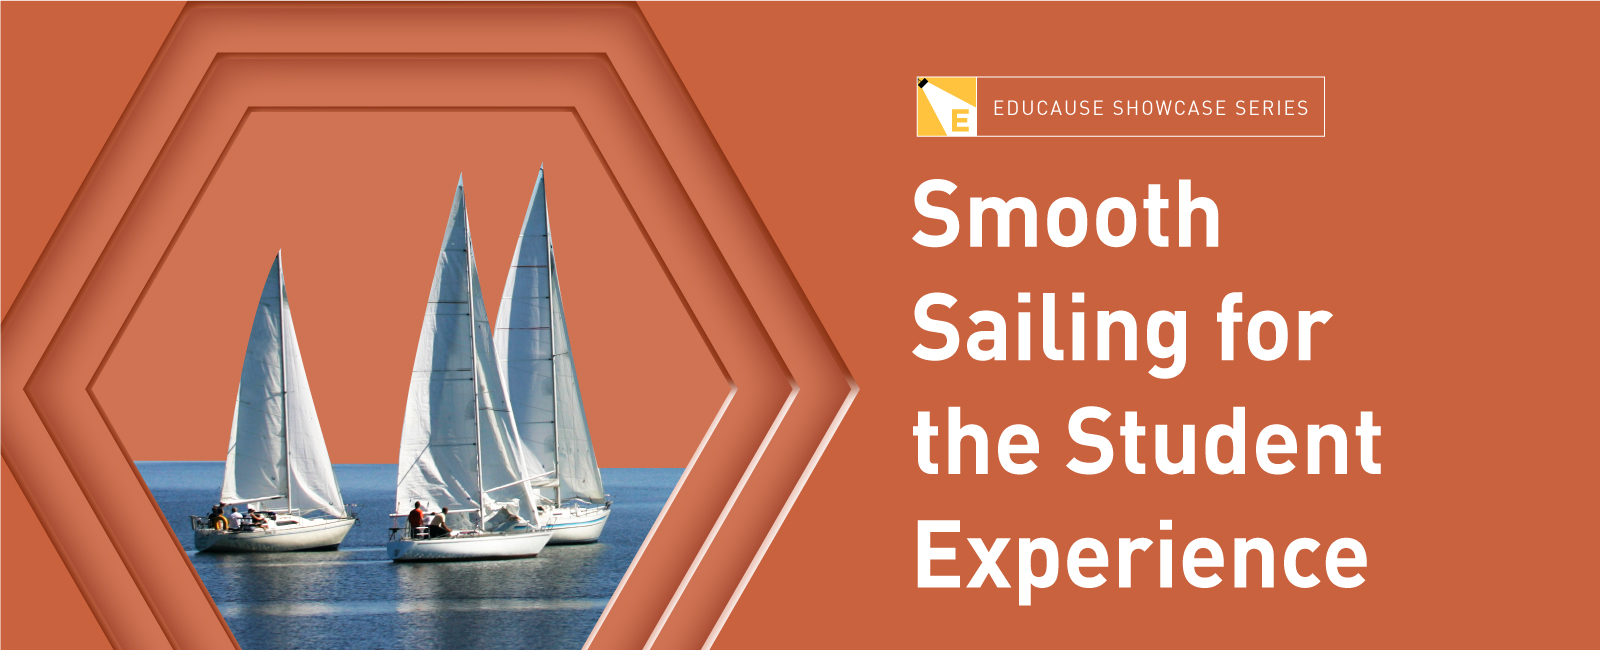 EDUCAUSE Showcase Series | Smooth Sailing for the Student Experience. 